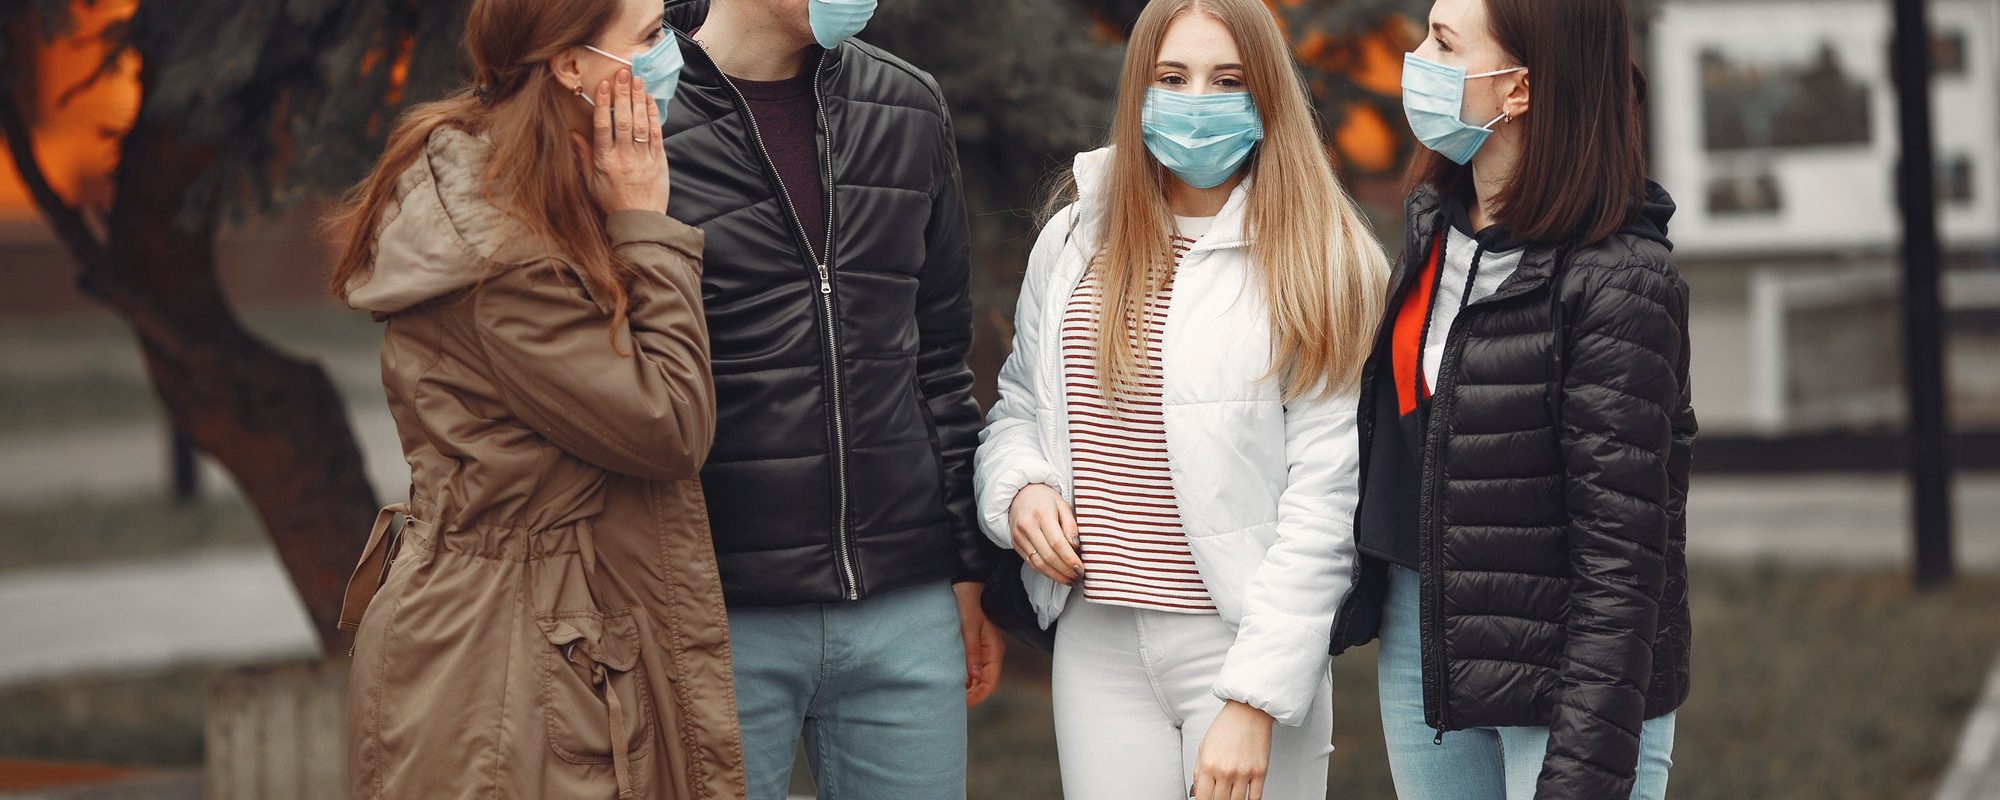 Young people are spreading disposable masks outside